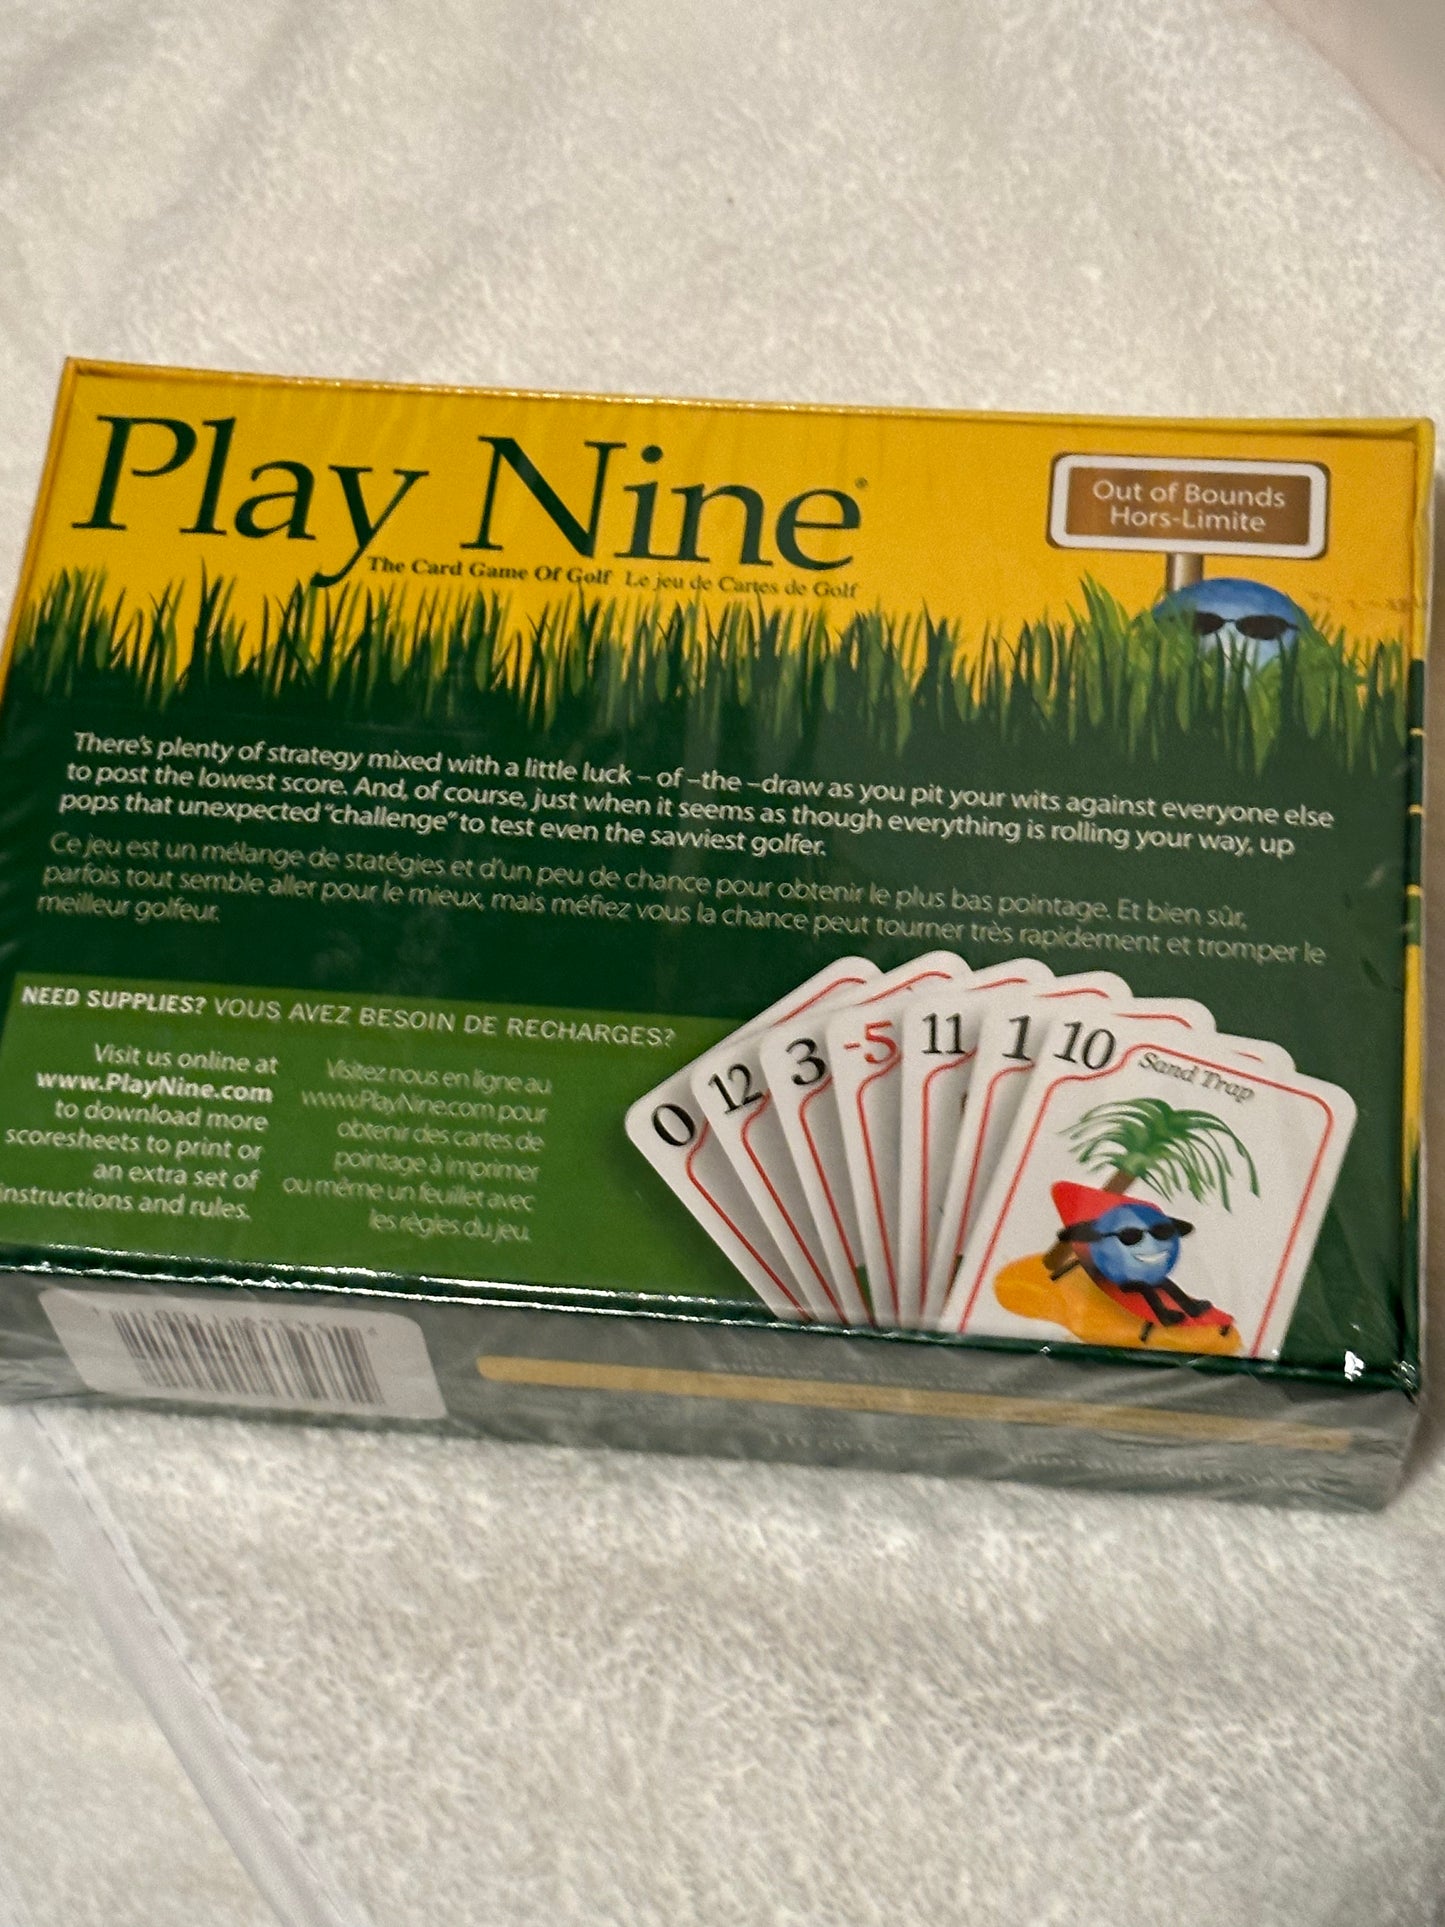 Score a Hole-in-One with Play Nine: The Ultimate Card Game of Golf Fun!